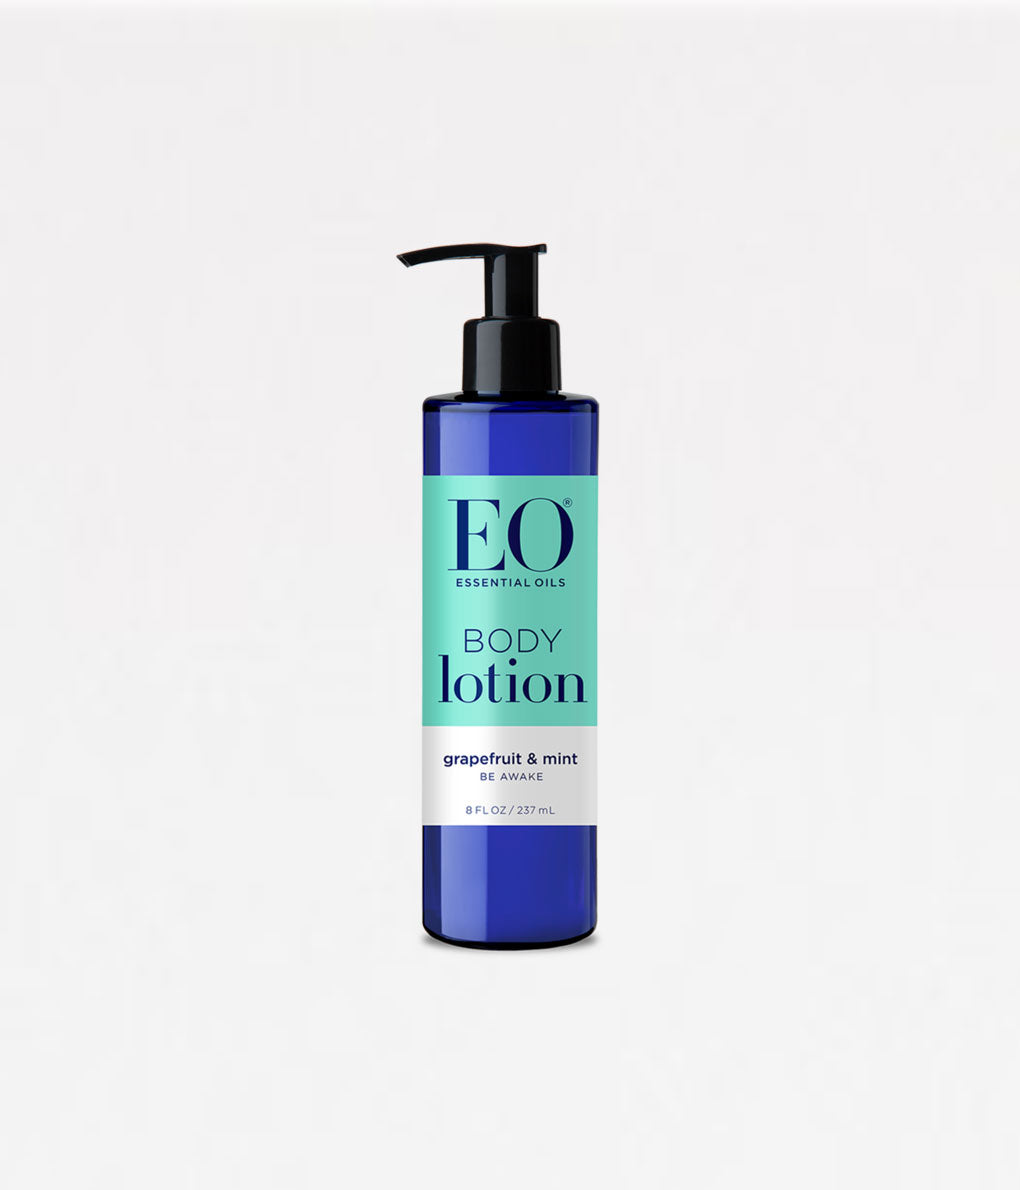 EO "BODY LOTION" (3 SCENTS)